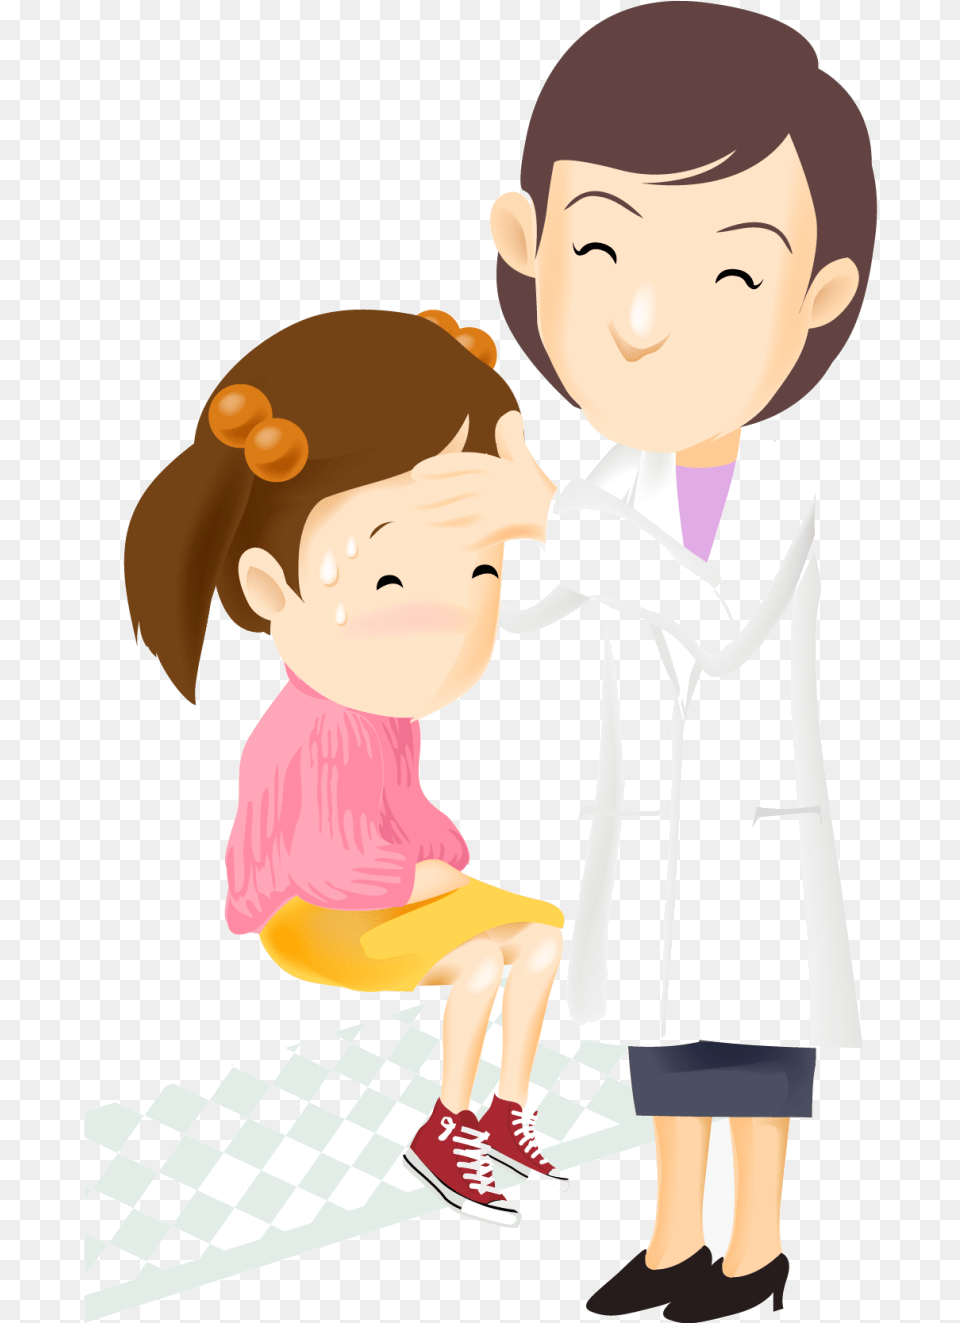 Sick Person Mother Vector Child Care Cartoon Cliparts Gambar Dokter Anak Kartun, Baby, Face, Head, Clothing Png Image